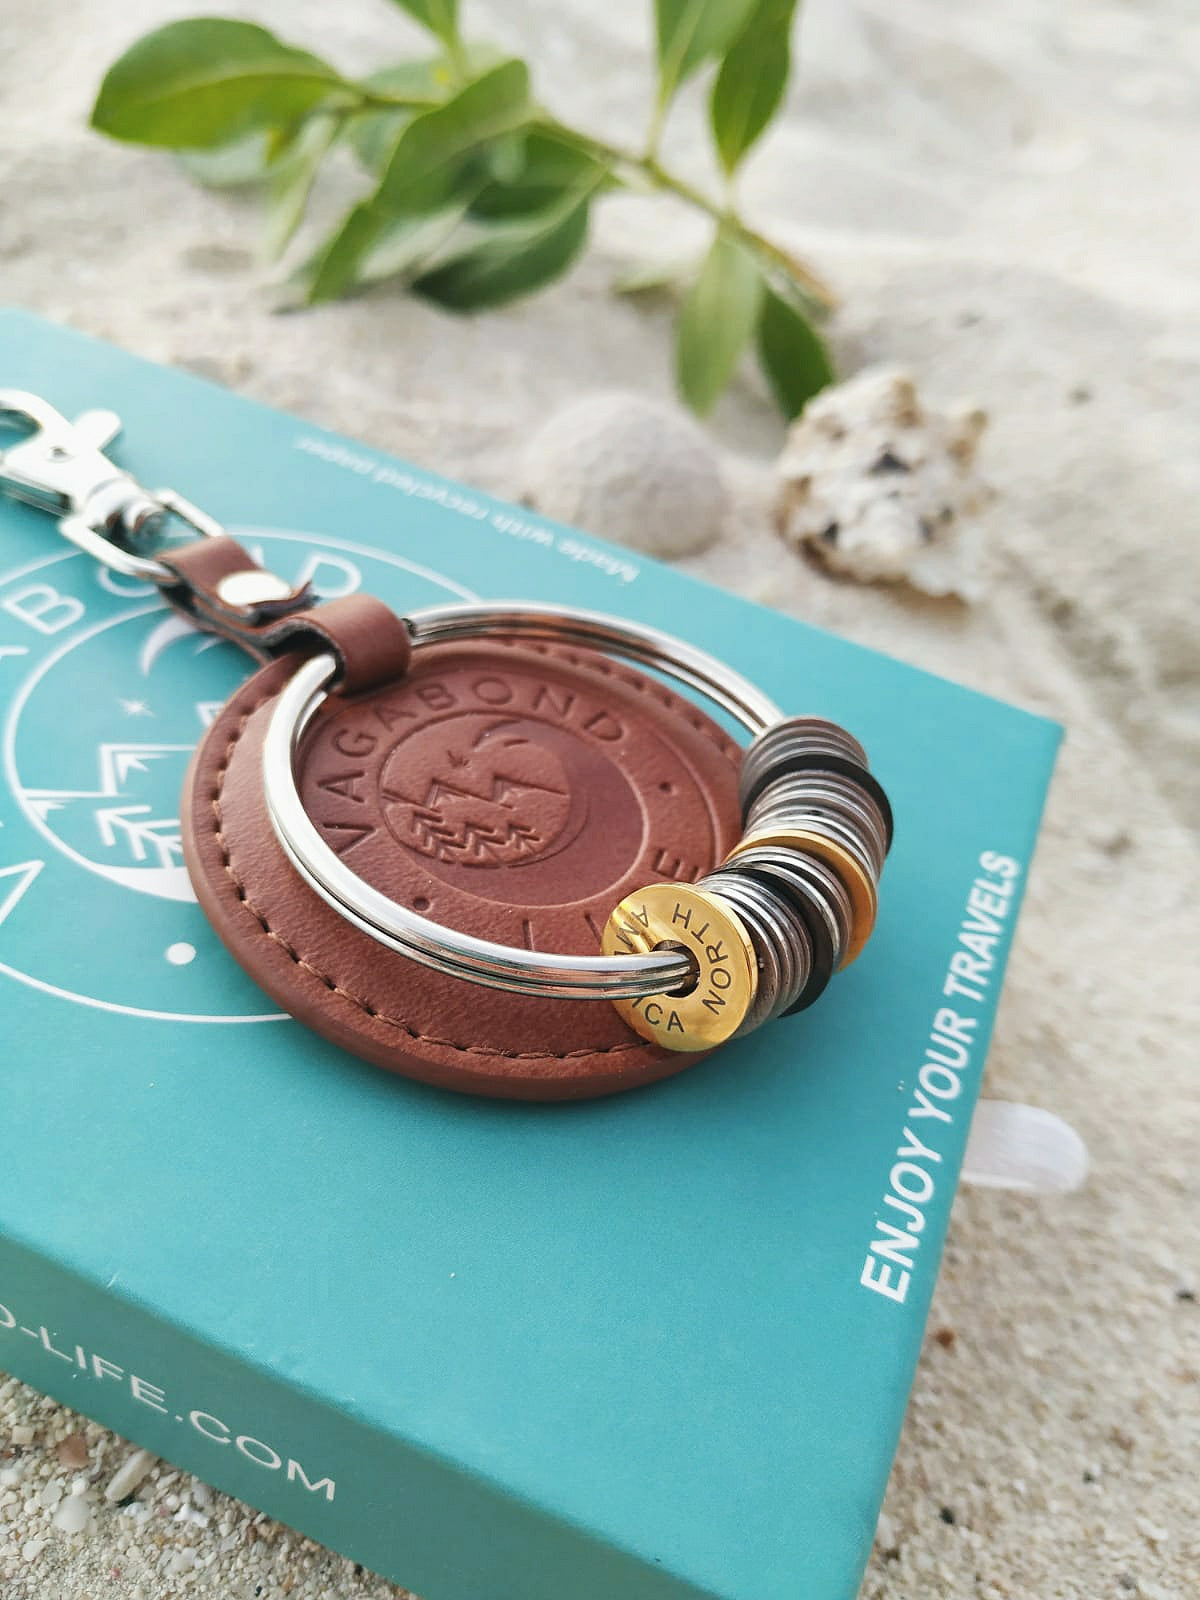 Traveler Key Chain - Collect Your Travels - Vagabond Life